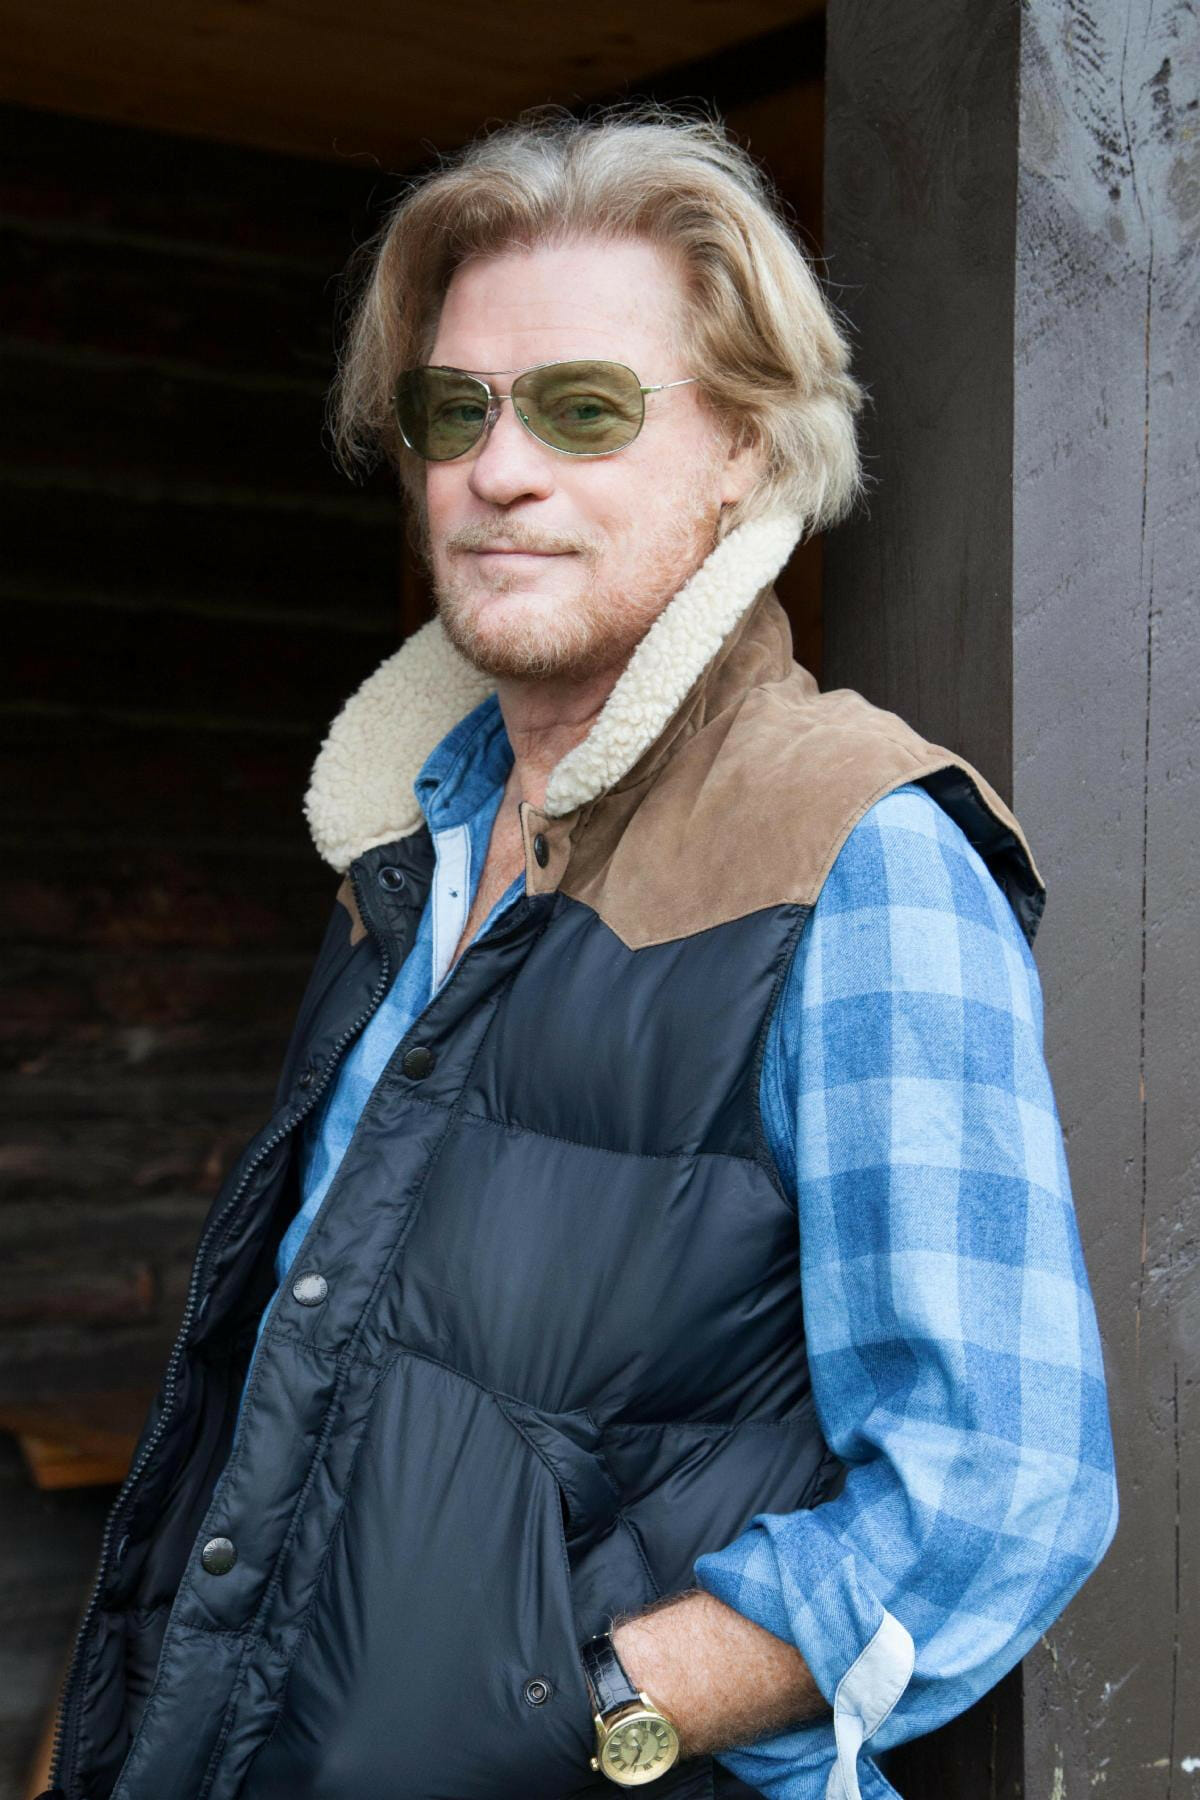 Daryl Hall Plots London Concert with Todd Rundgren, Will Support Billy Joel at BST Hyde Park